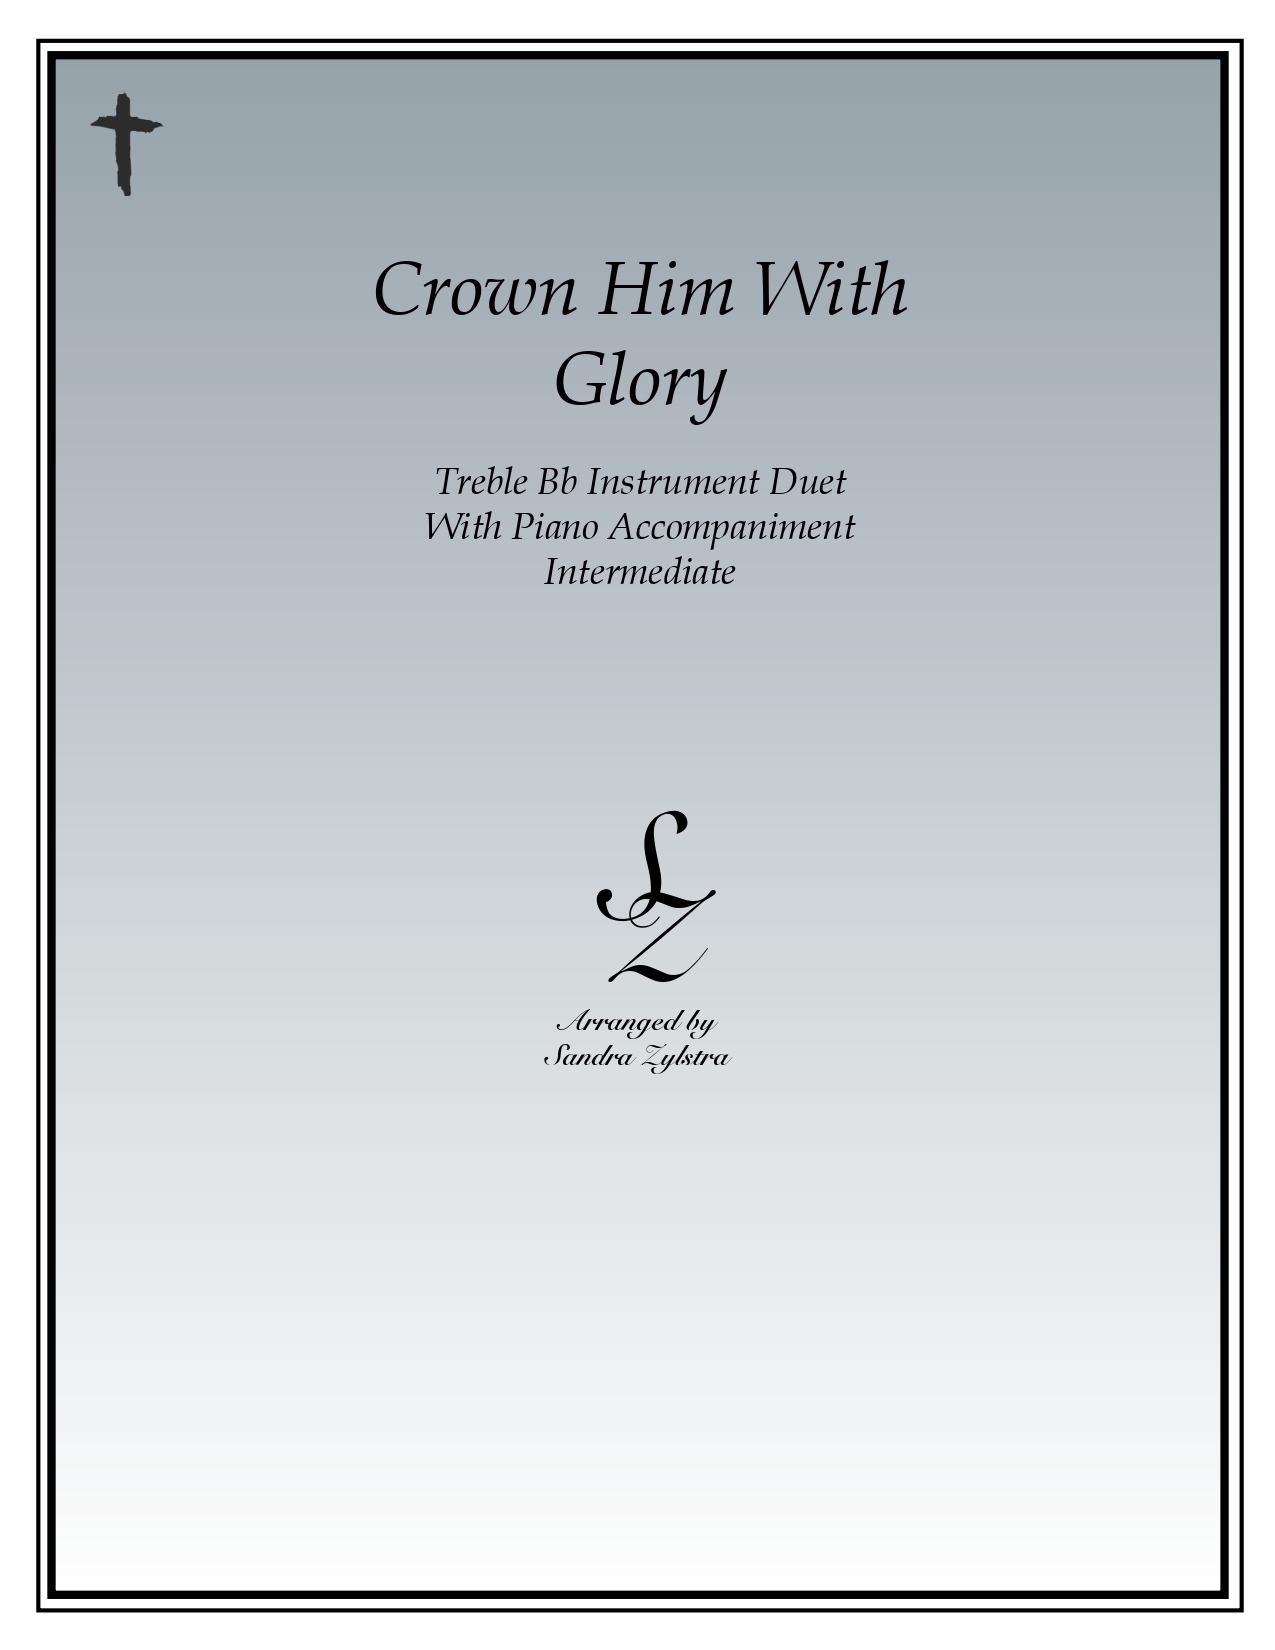 Crown Him With Glory Bb instrument duet parts cover page 00011